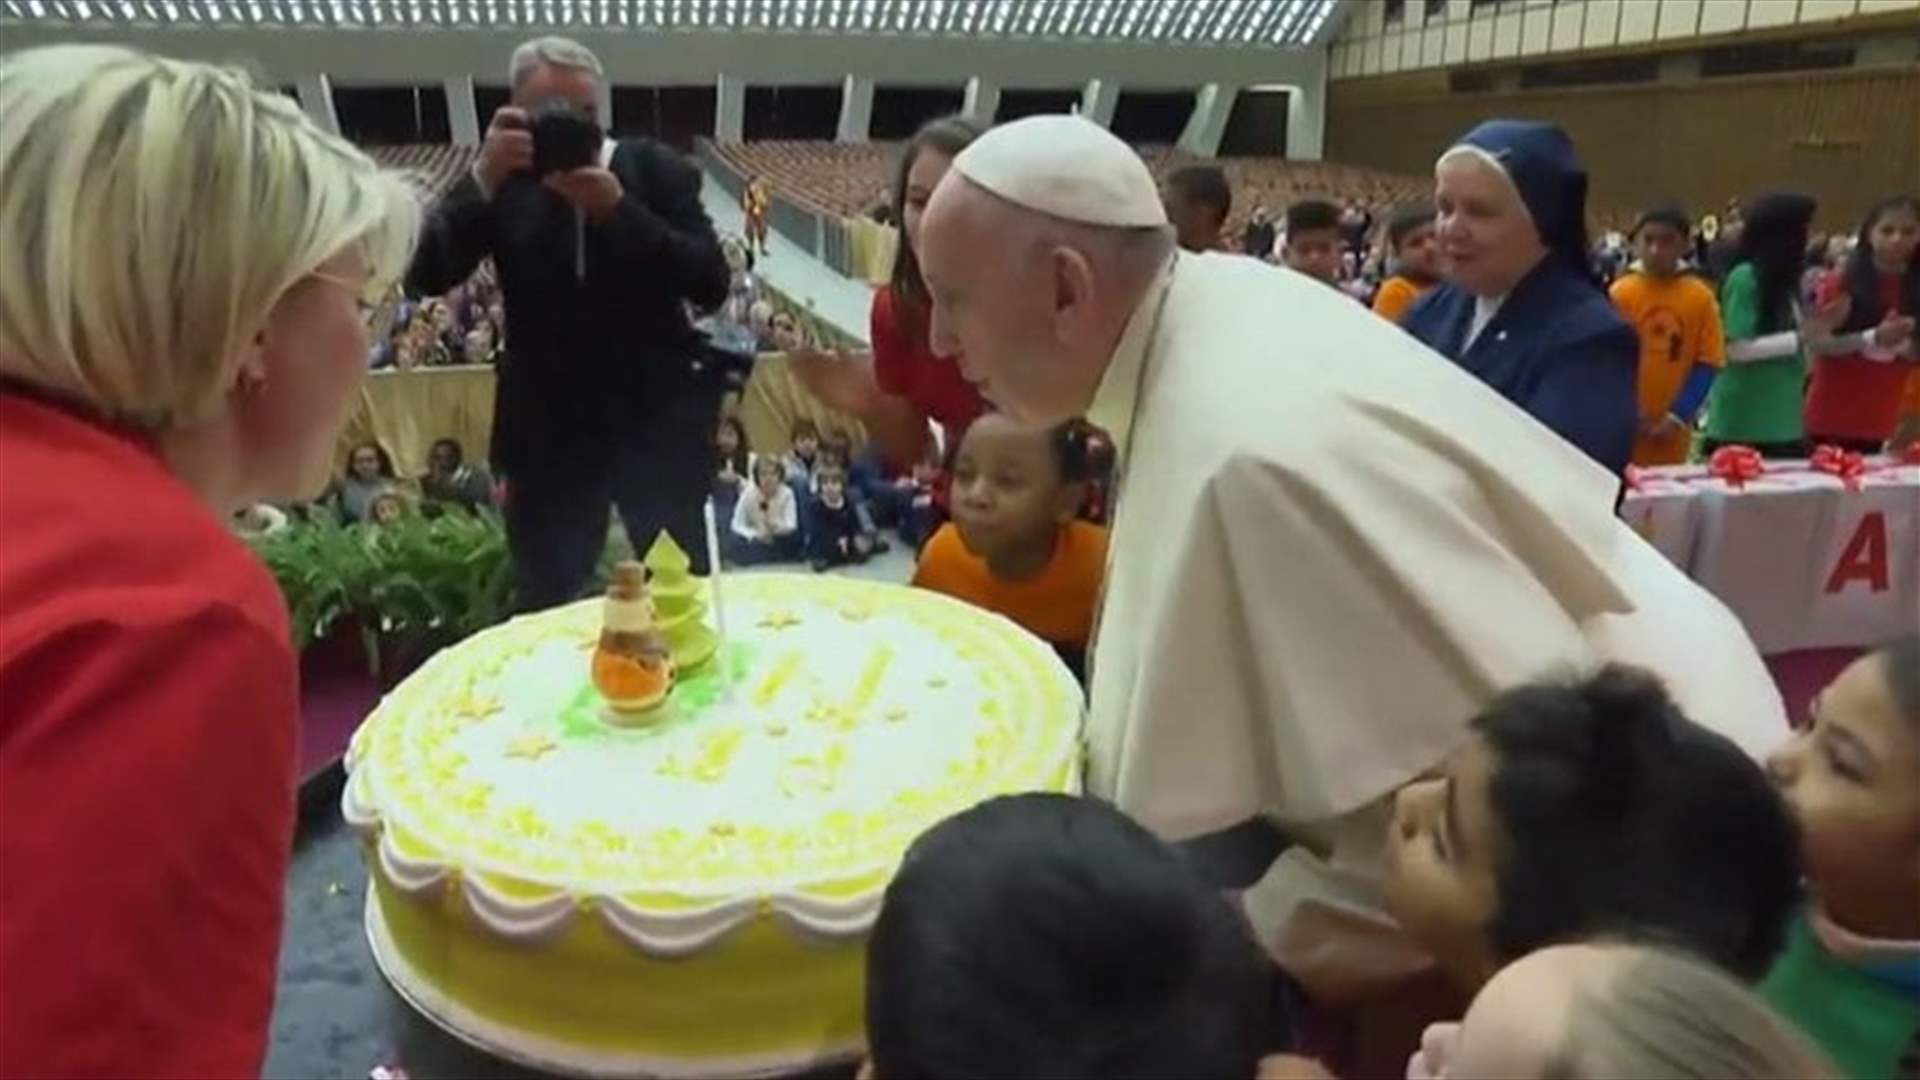 Pope celebrates birthday a day early with sick children